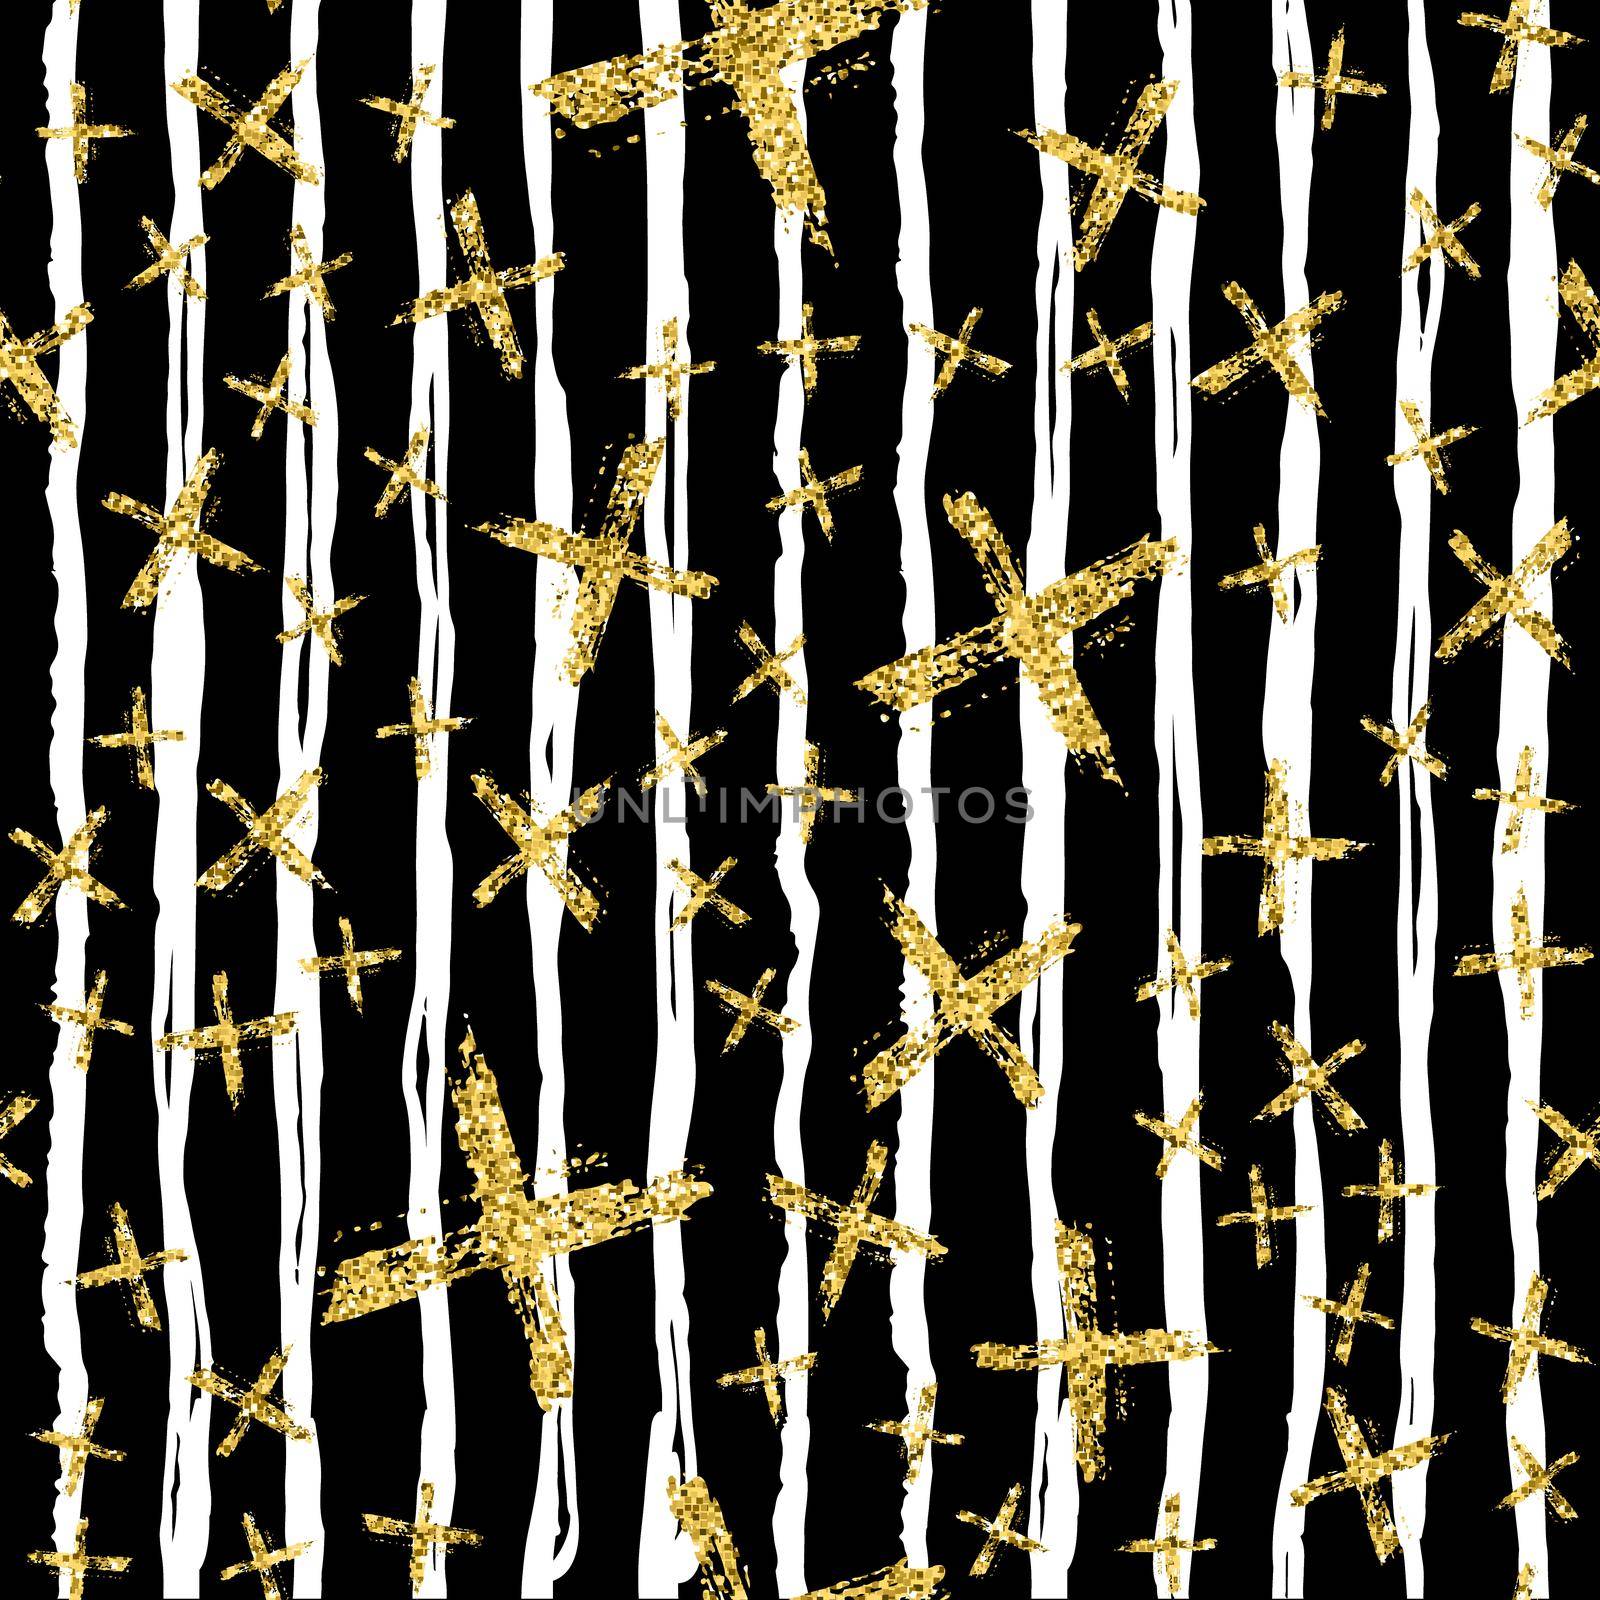 Modern seamless pattern with brush stripes and cross. White, gold metallic color on black background. Golden glitter texture. Ink geometric elements. Fashion catwalk style. Repeat fabric cloth print